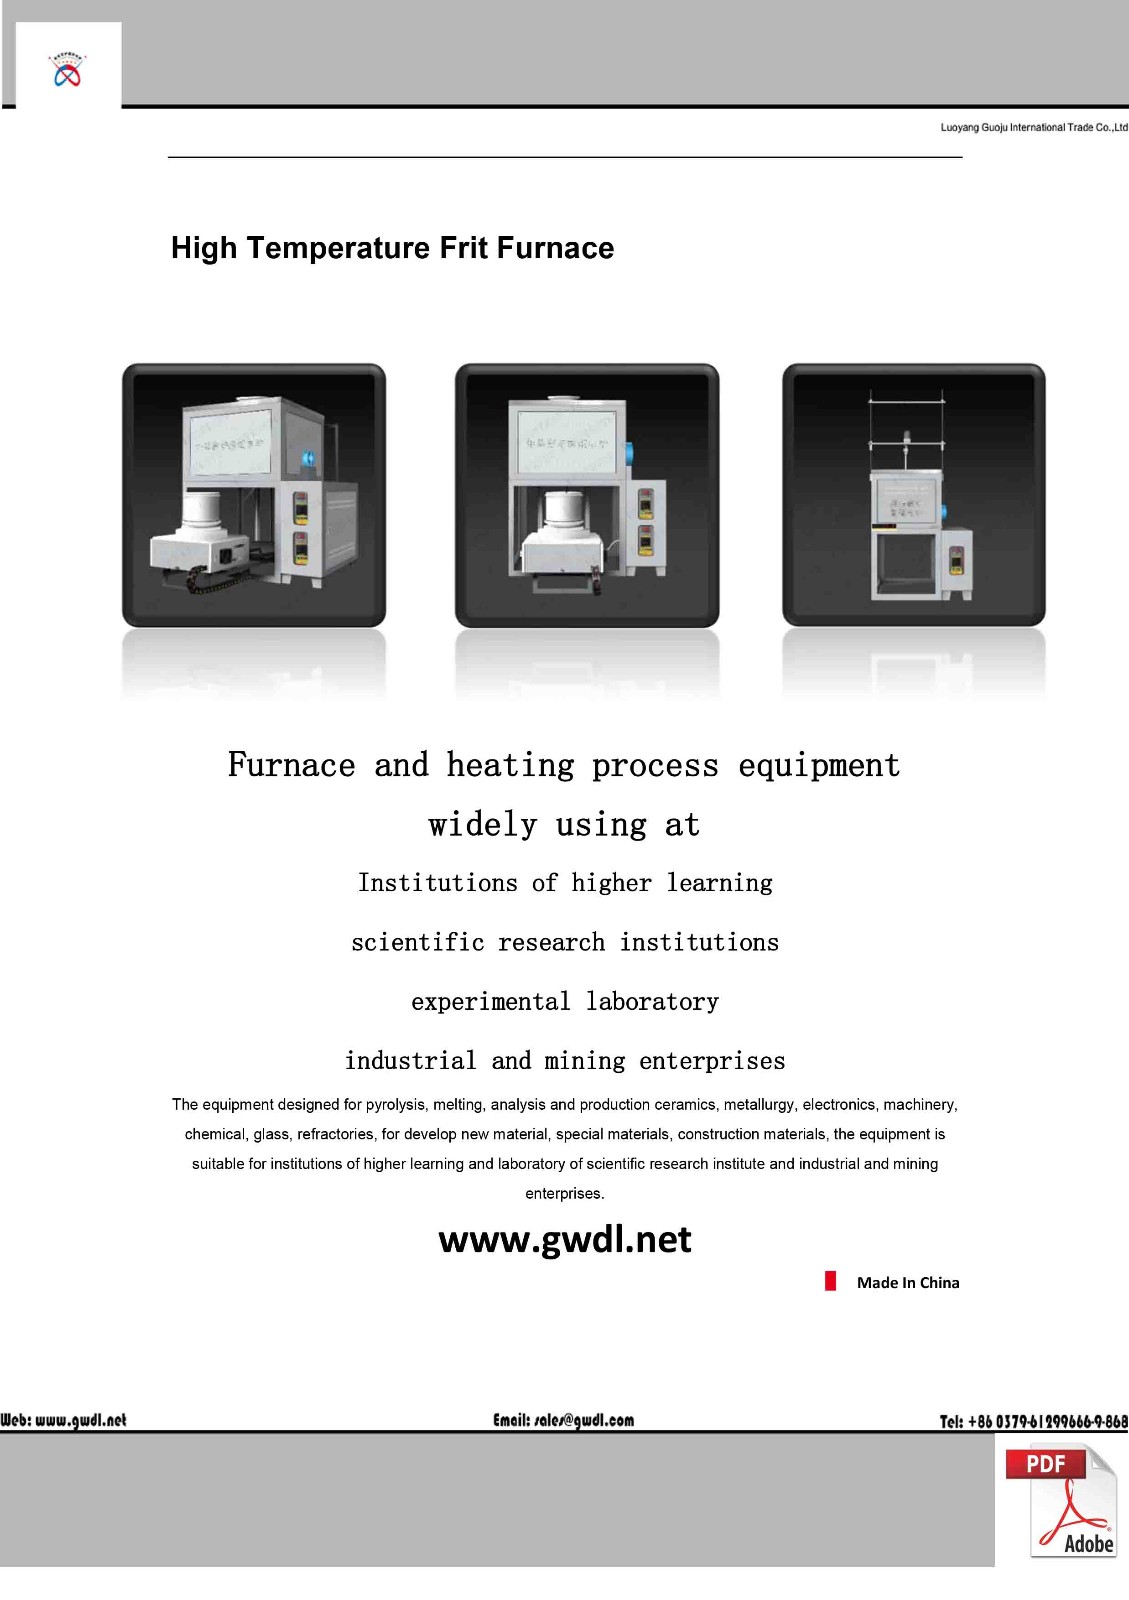 High Temperature Large Scale Lifting Frit Furnace(GWL-R)